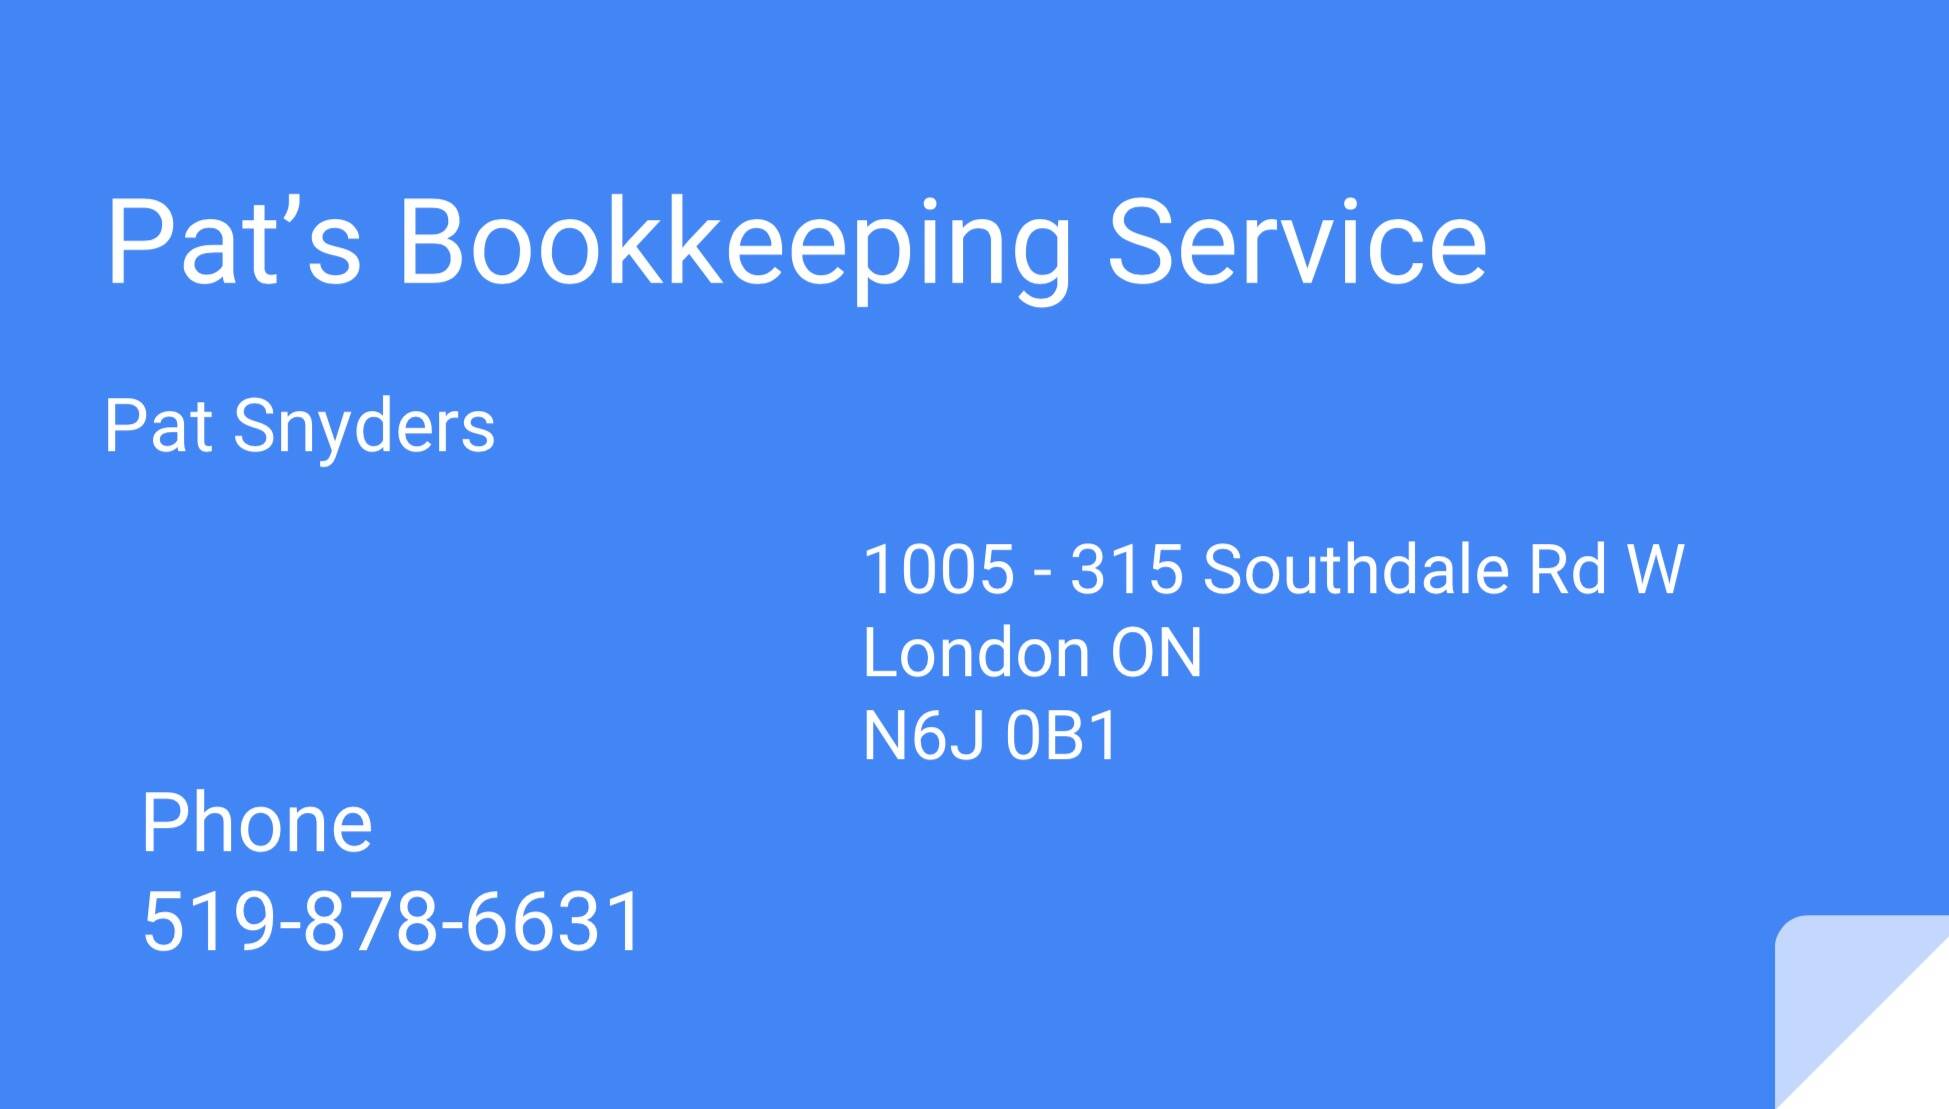 Pat's Bookkeeping Service